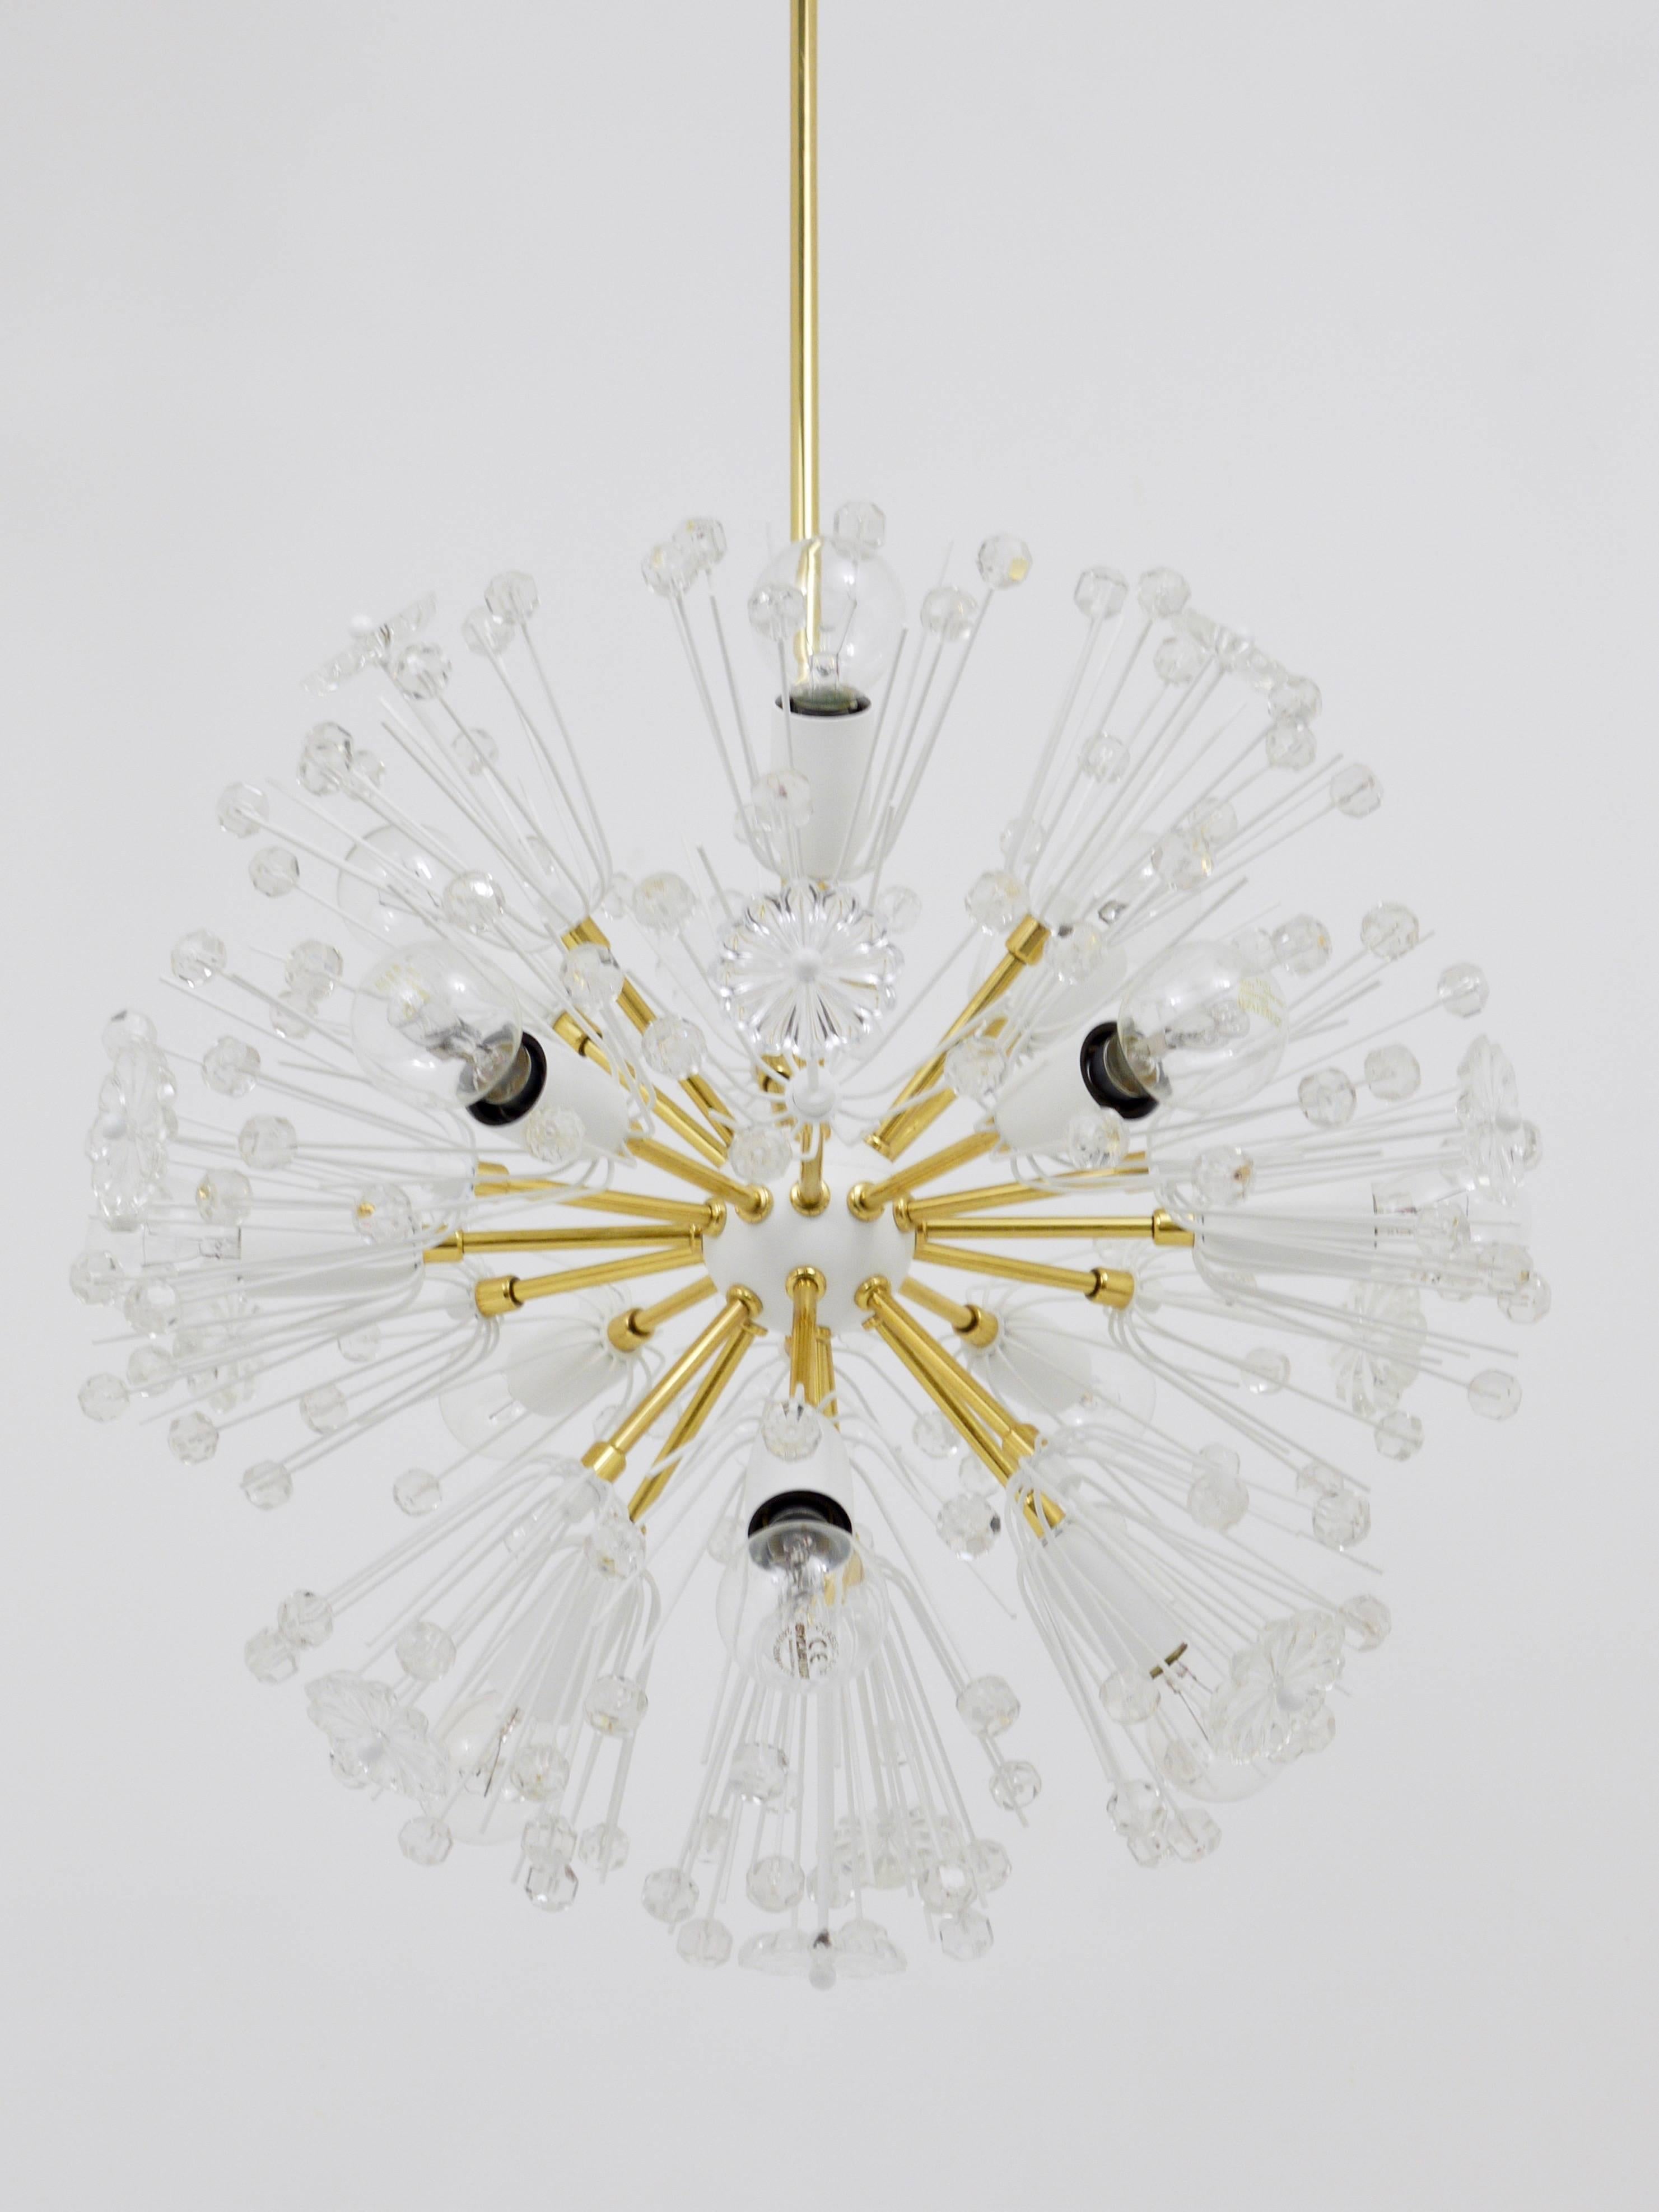 A stunning Mid-Century sputnik dandelion blowball chandelier, designed by Emil Stejnar and produced by Rupert Nikoll Vienna / Austria in the 1950s. This early model features a central white ball and a tulip-shaped canopy. It is crafted from brass